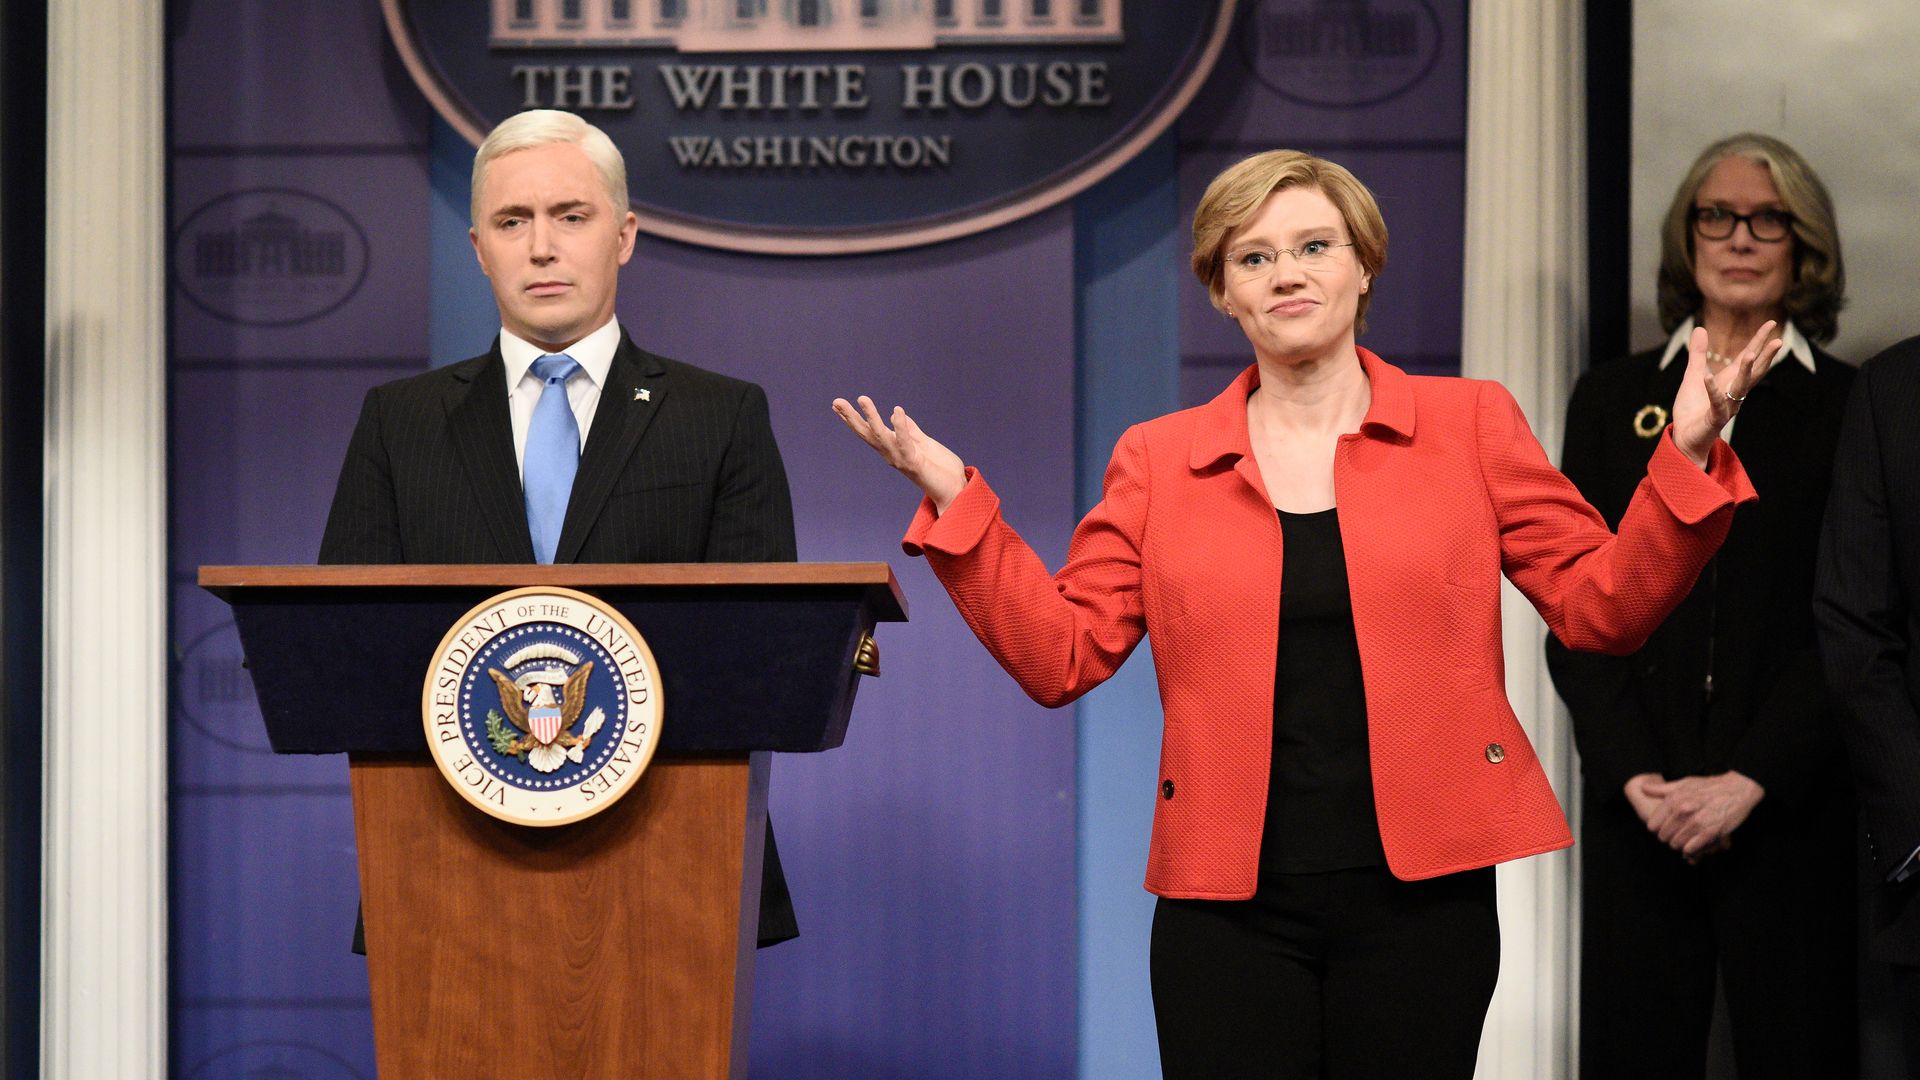  Beck Bennett as Mike Pence, and Kate McKinnon as Elizabeth Warren during the "Corona Virus" Cold Open on Saturday, February 29